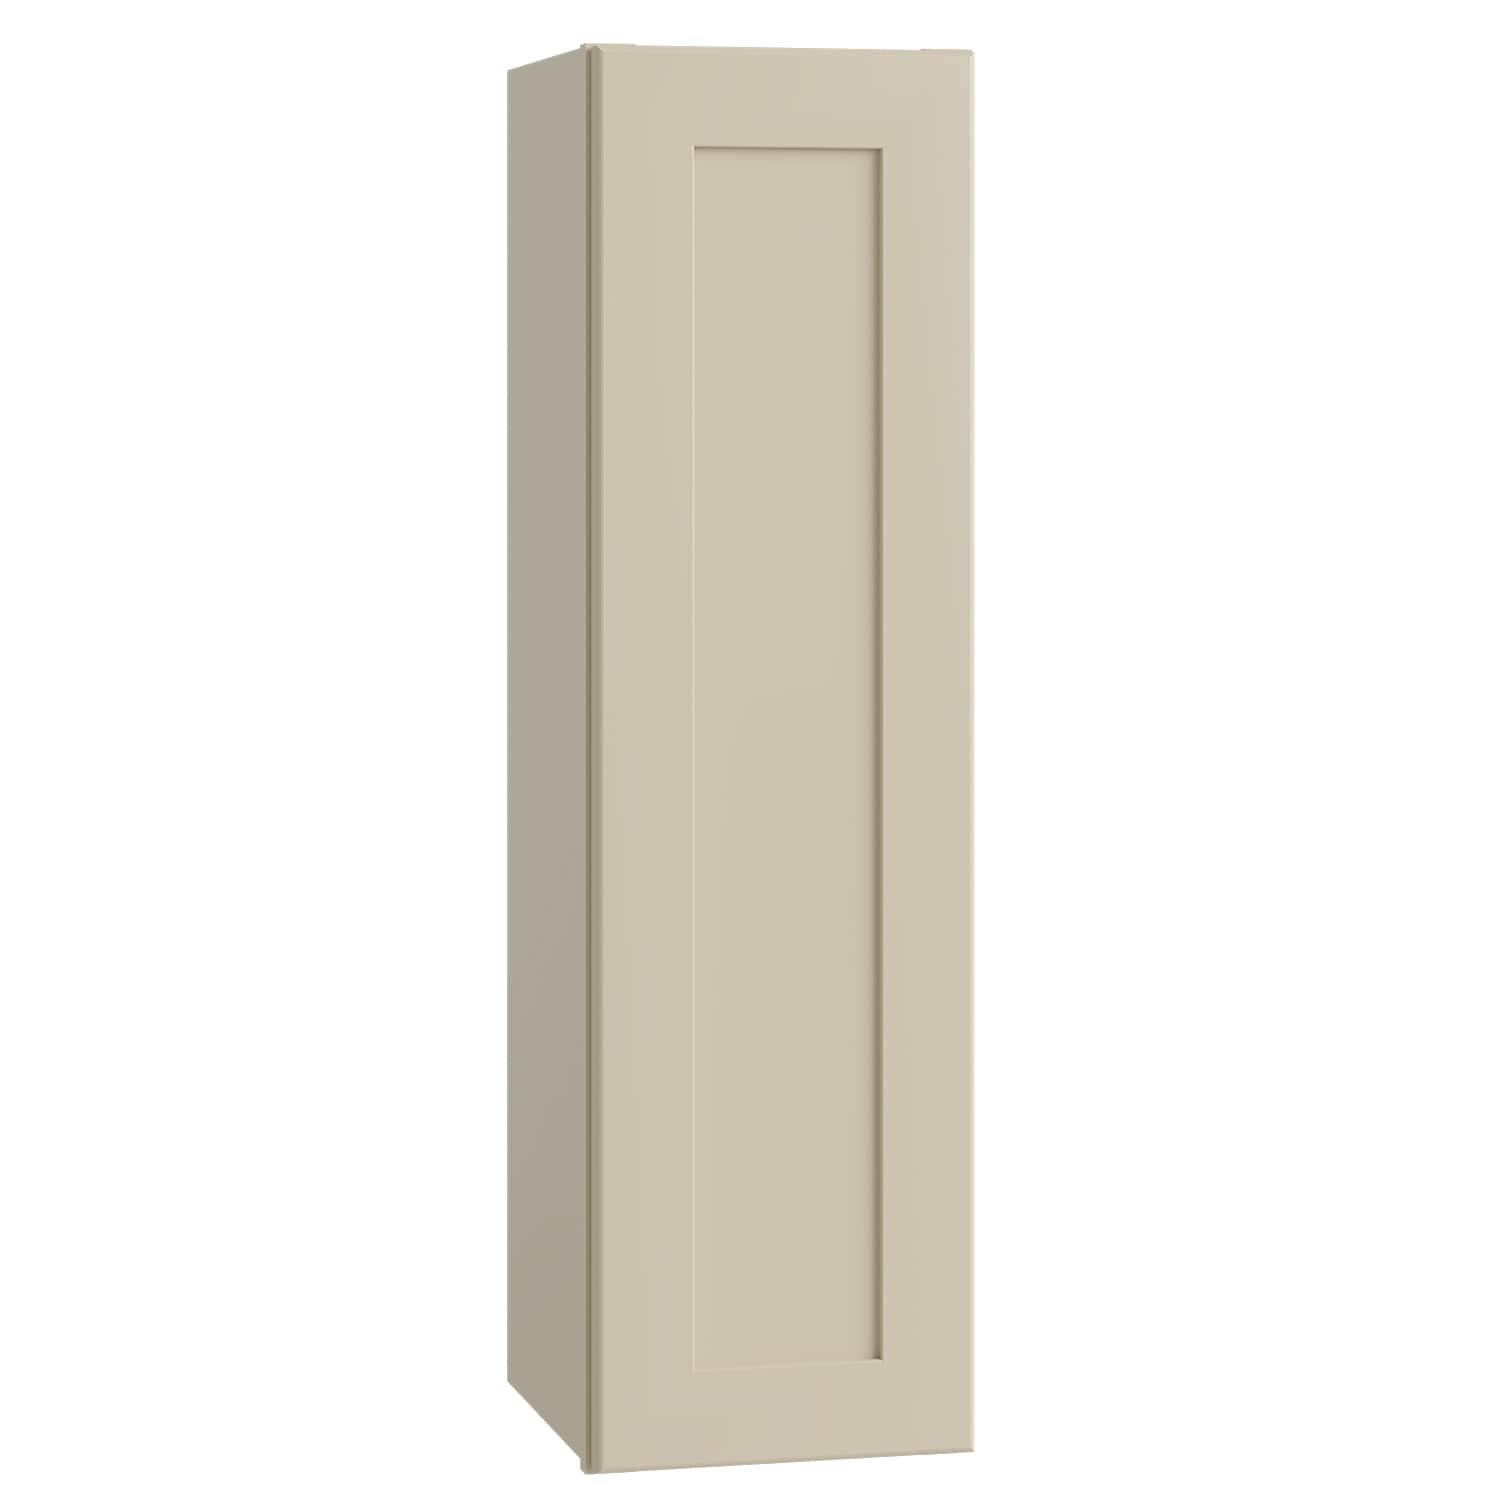 Luxxe Cabinetry 12-in W x 42-in H x 12-in D Norfolk Blended Cream Painted Door Wall Fully Assembled Semi-custom Cabinet in Off-White | W1242L-NBC